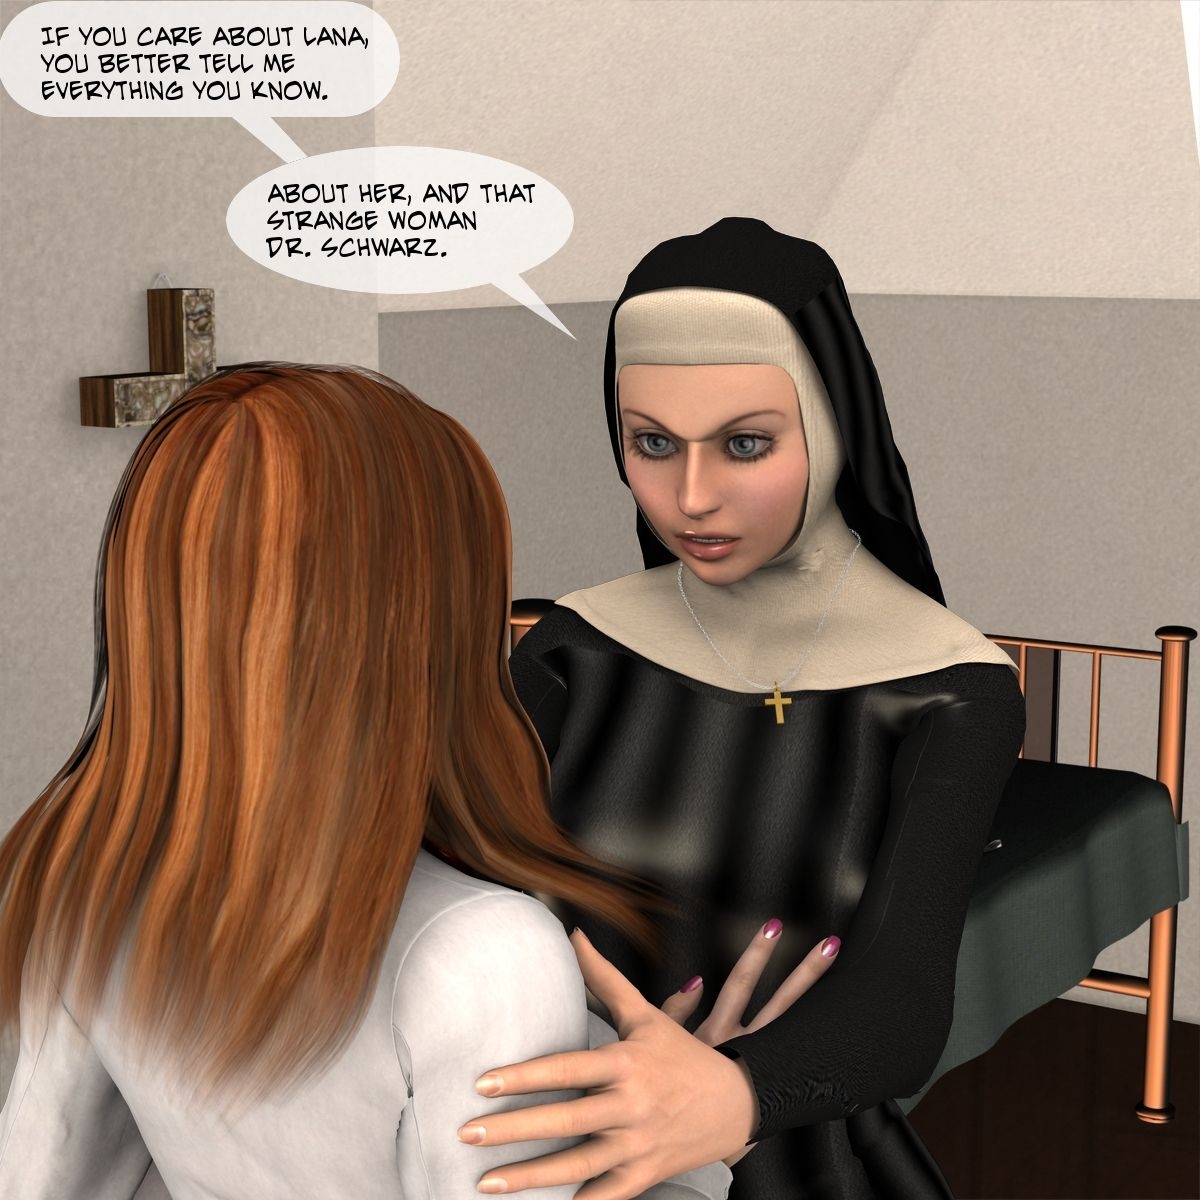 [Fasdeviant] St. Irene: Our Lady of Lust Chapter 01 9